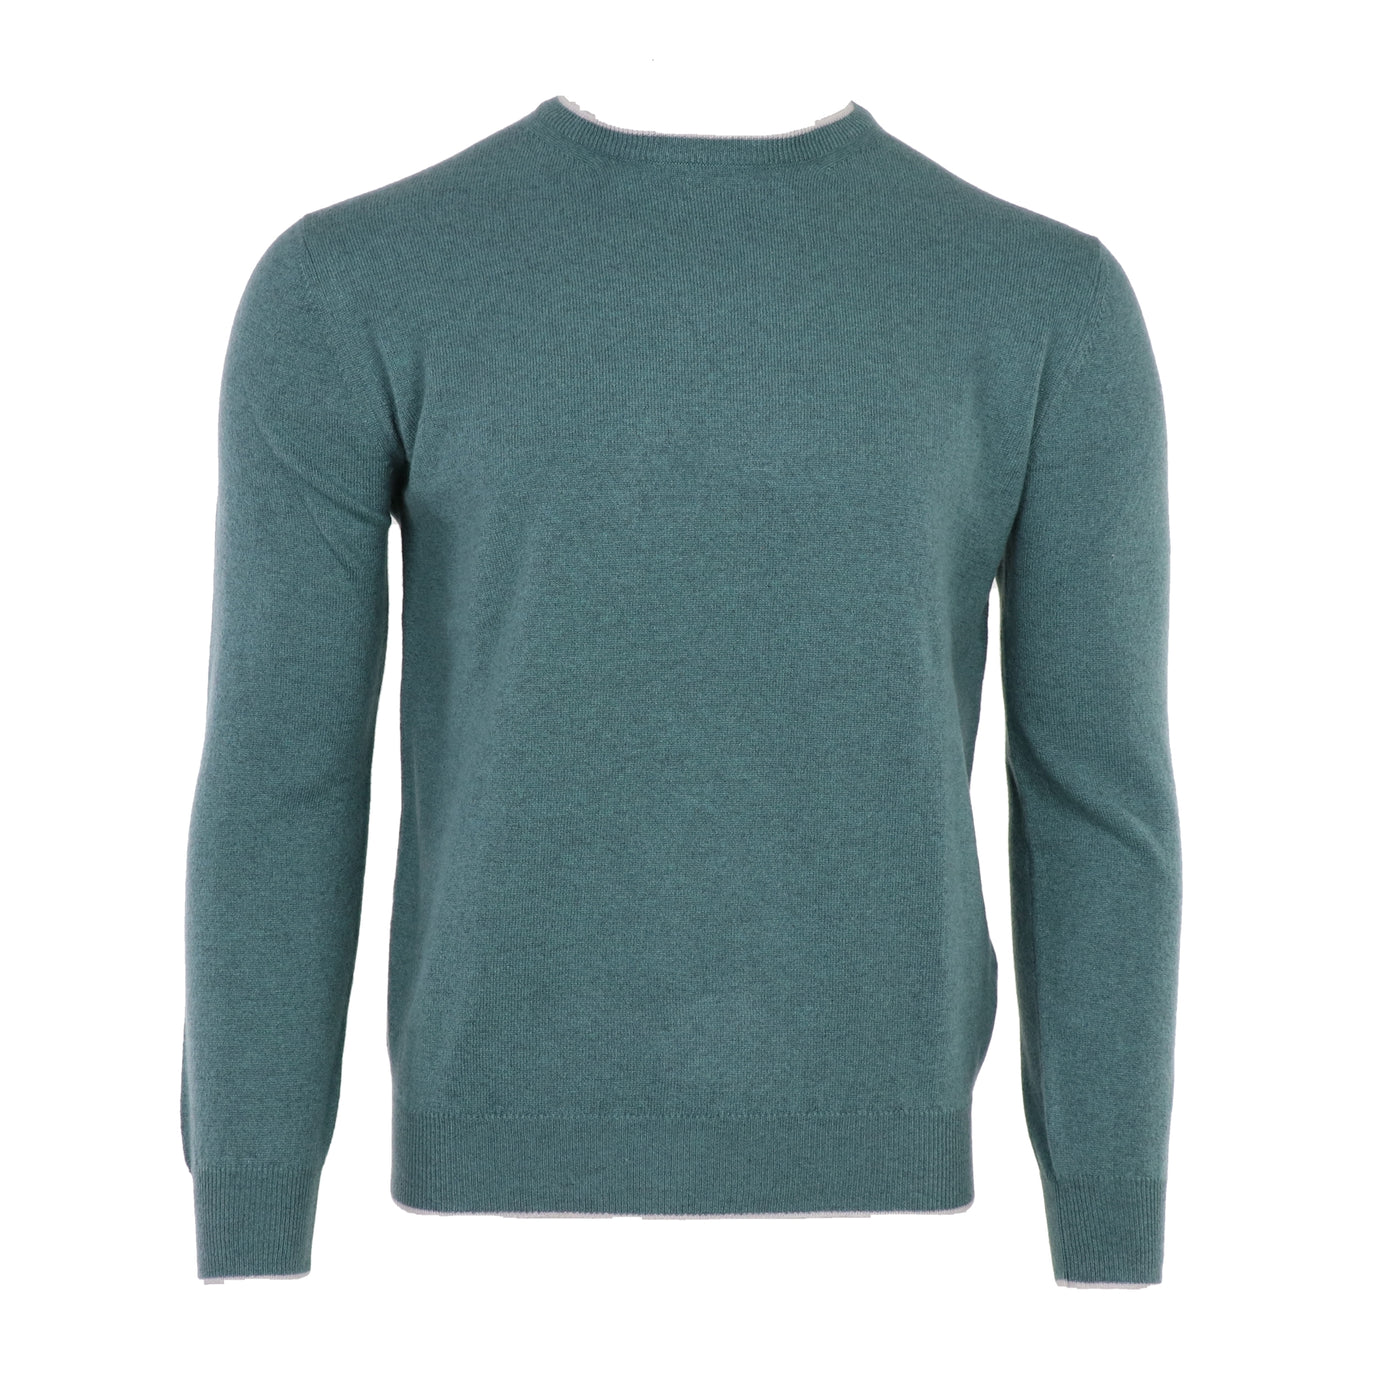 The Pashmere Cashmere Crewneck in Sage Green